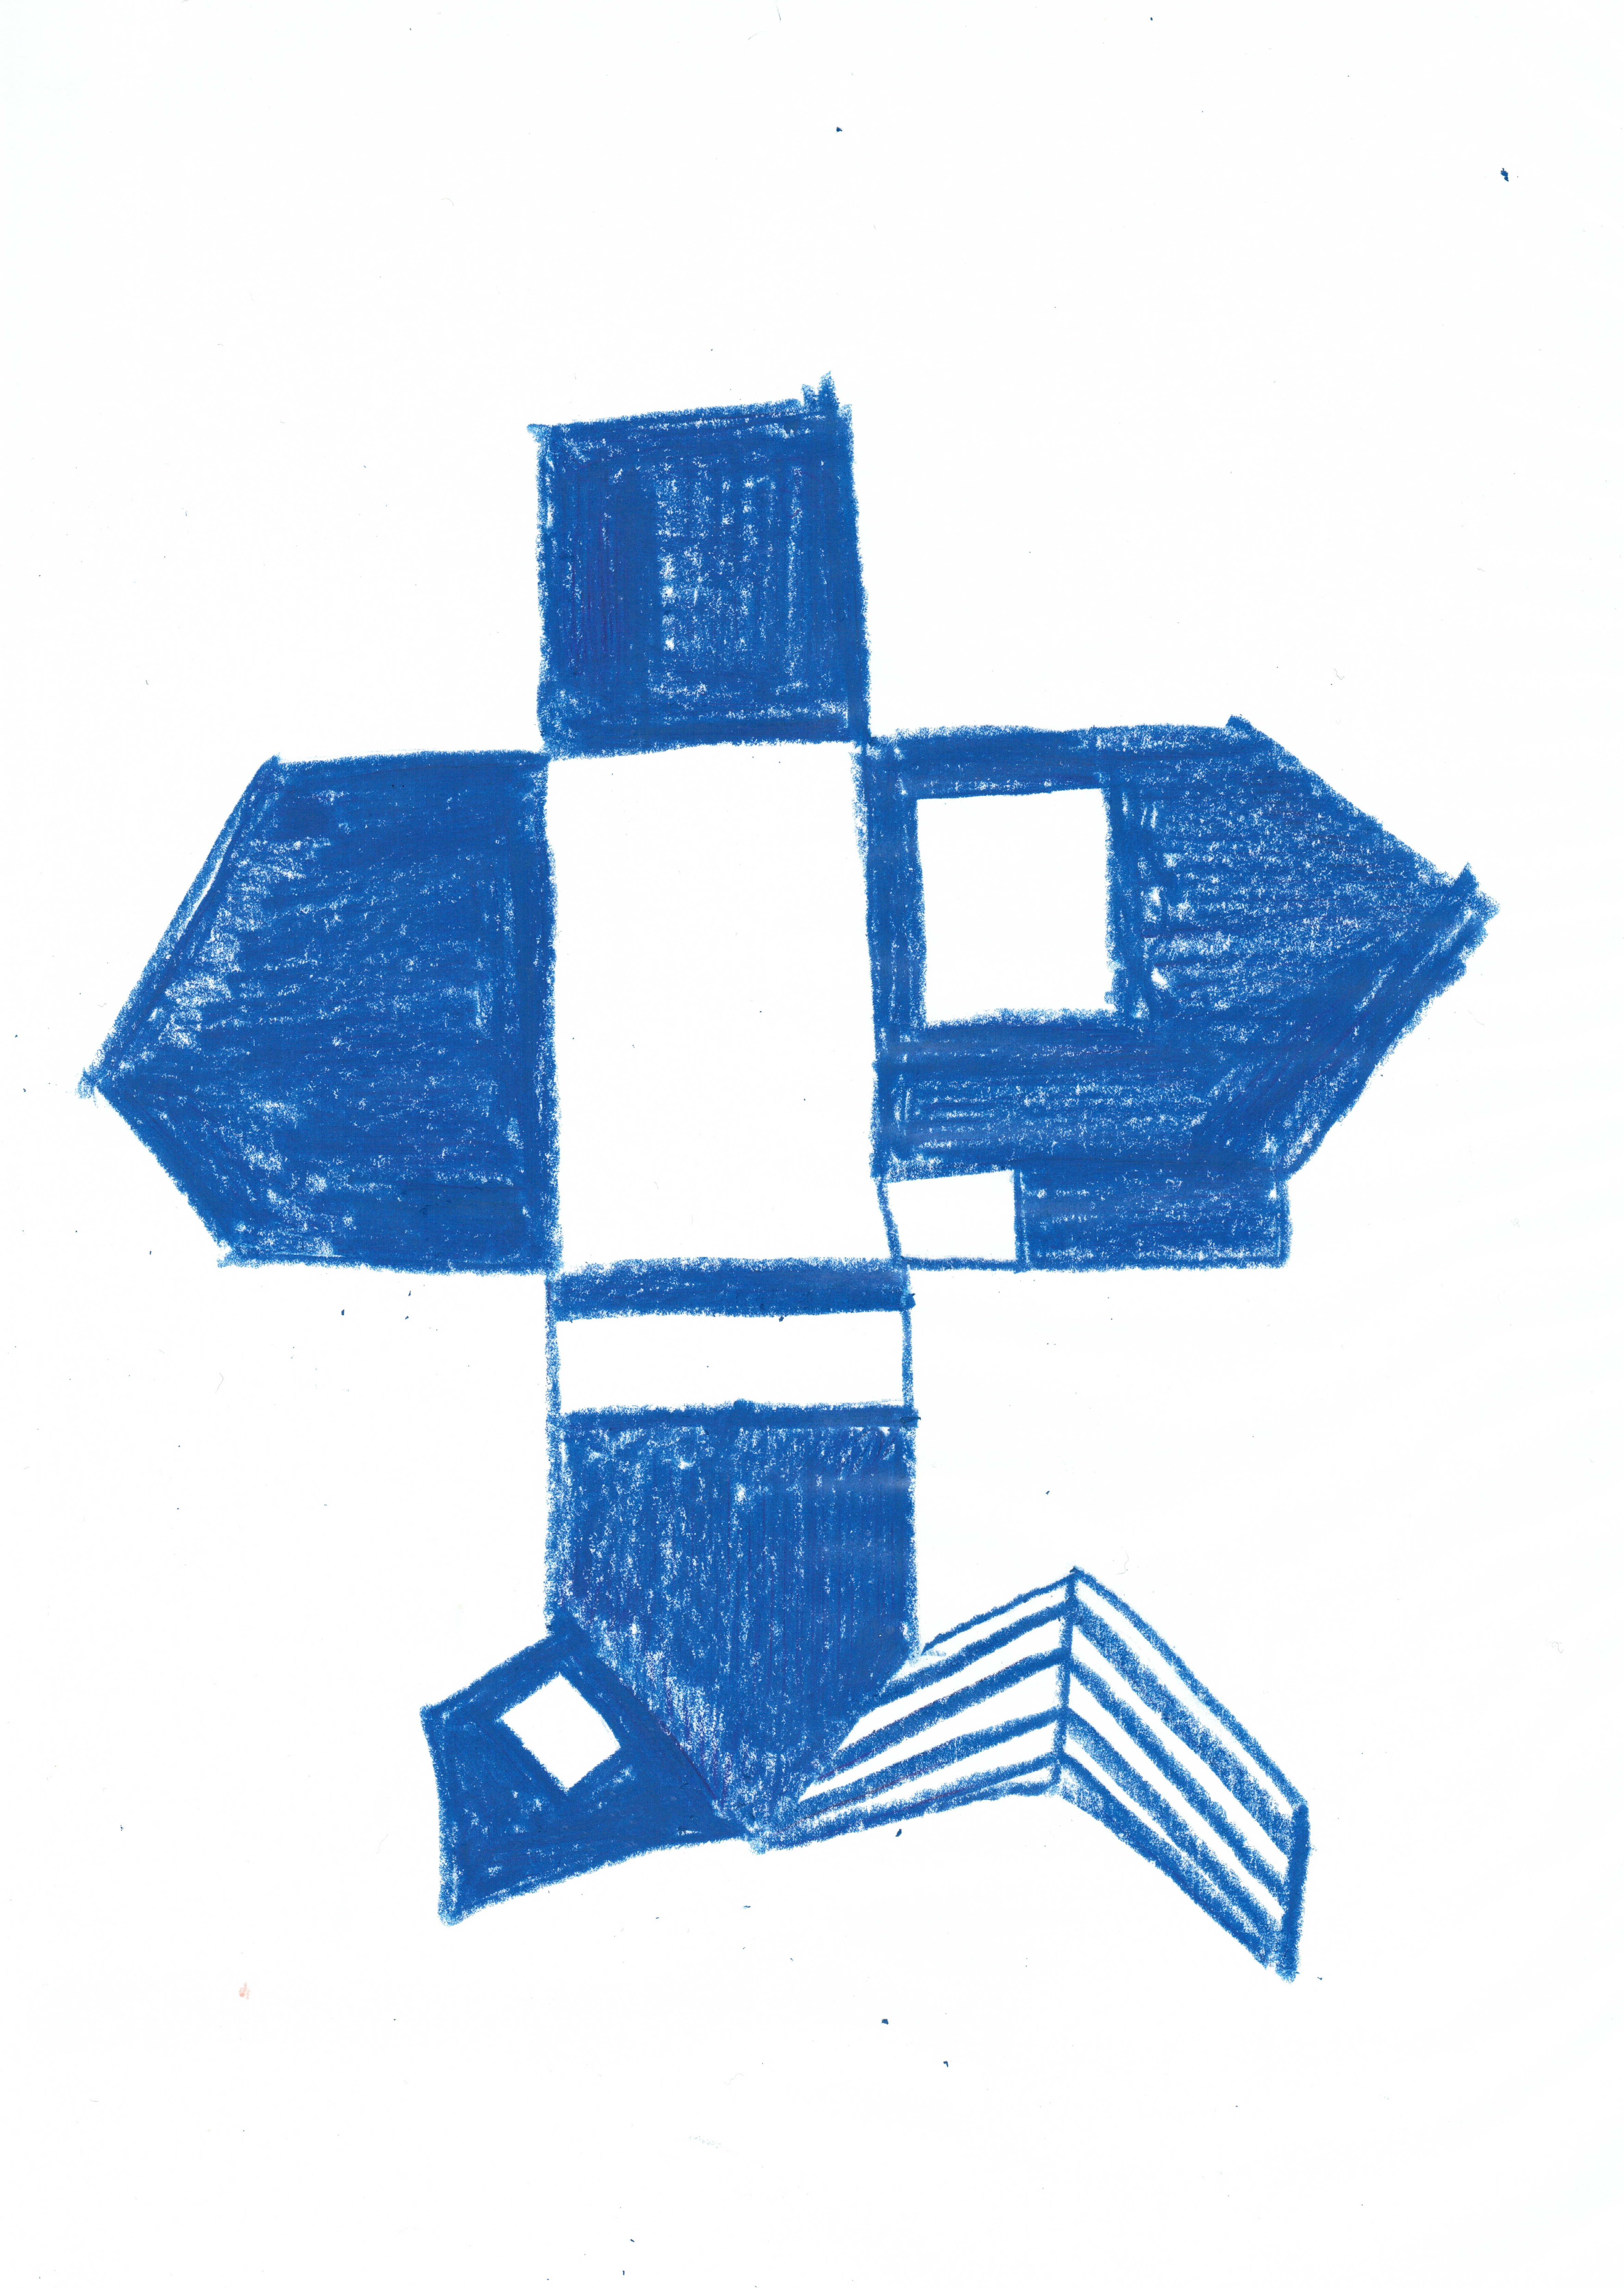 drawing in blue marker of unfolded building, showing walls and roof